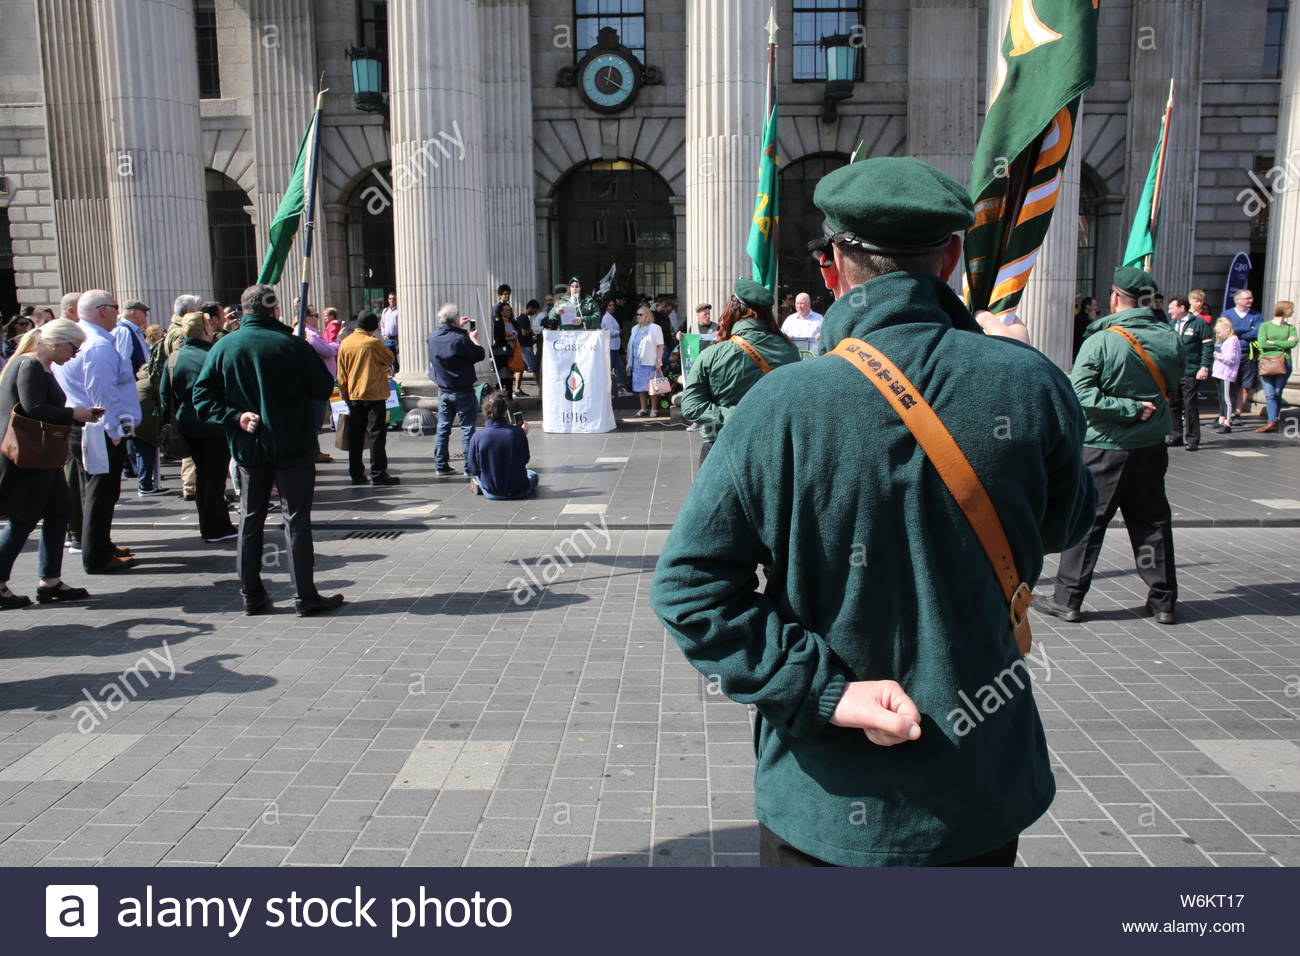 A military parade has taken place in Dublin to commemorate the 1916 Rising. Activists in military style uniform marched through Dublin followed by a s Stock Photo